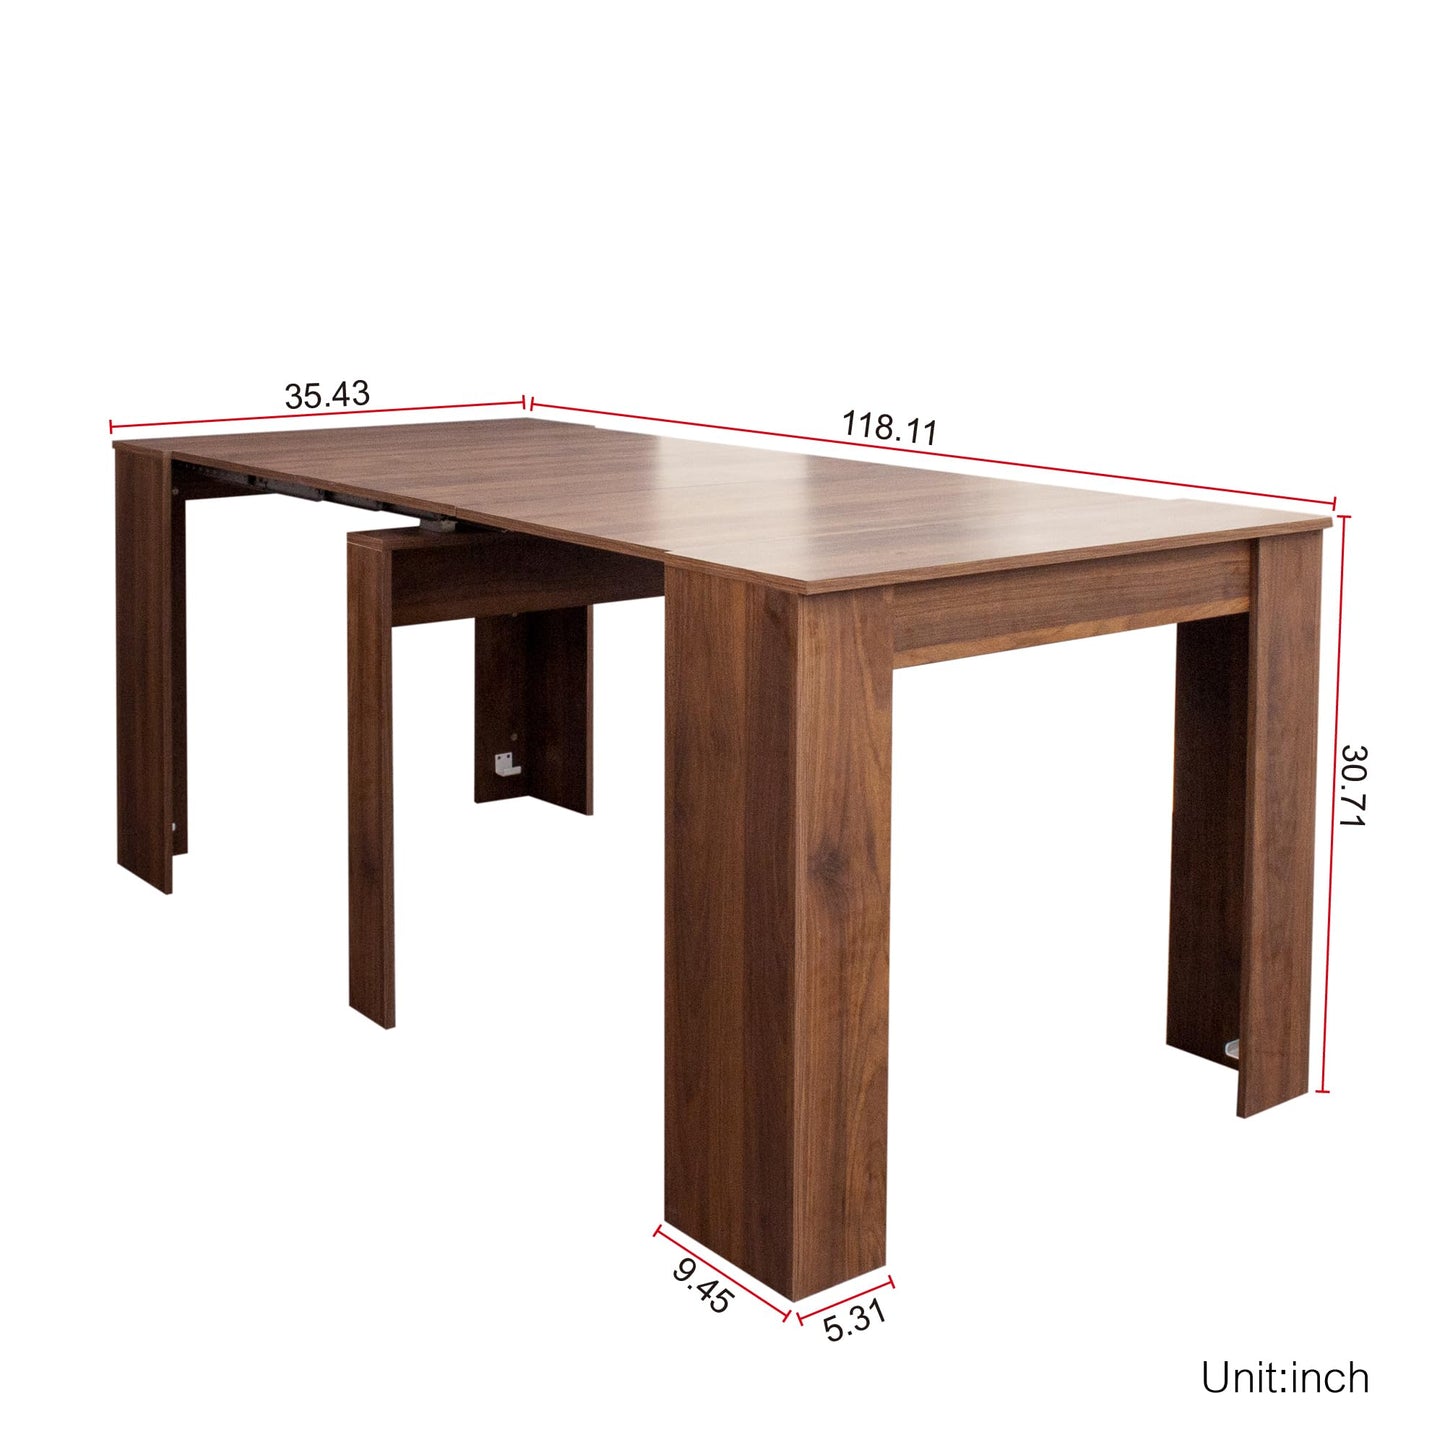 Binrrio Walnut Expandable Dining Table for 6-12 Person, Large Long Dining Room Table Wooden Kitchen Table for Compact Space, Expandable Console Table Dining Table Extendable from 20" to 118"